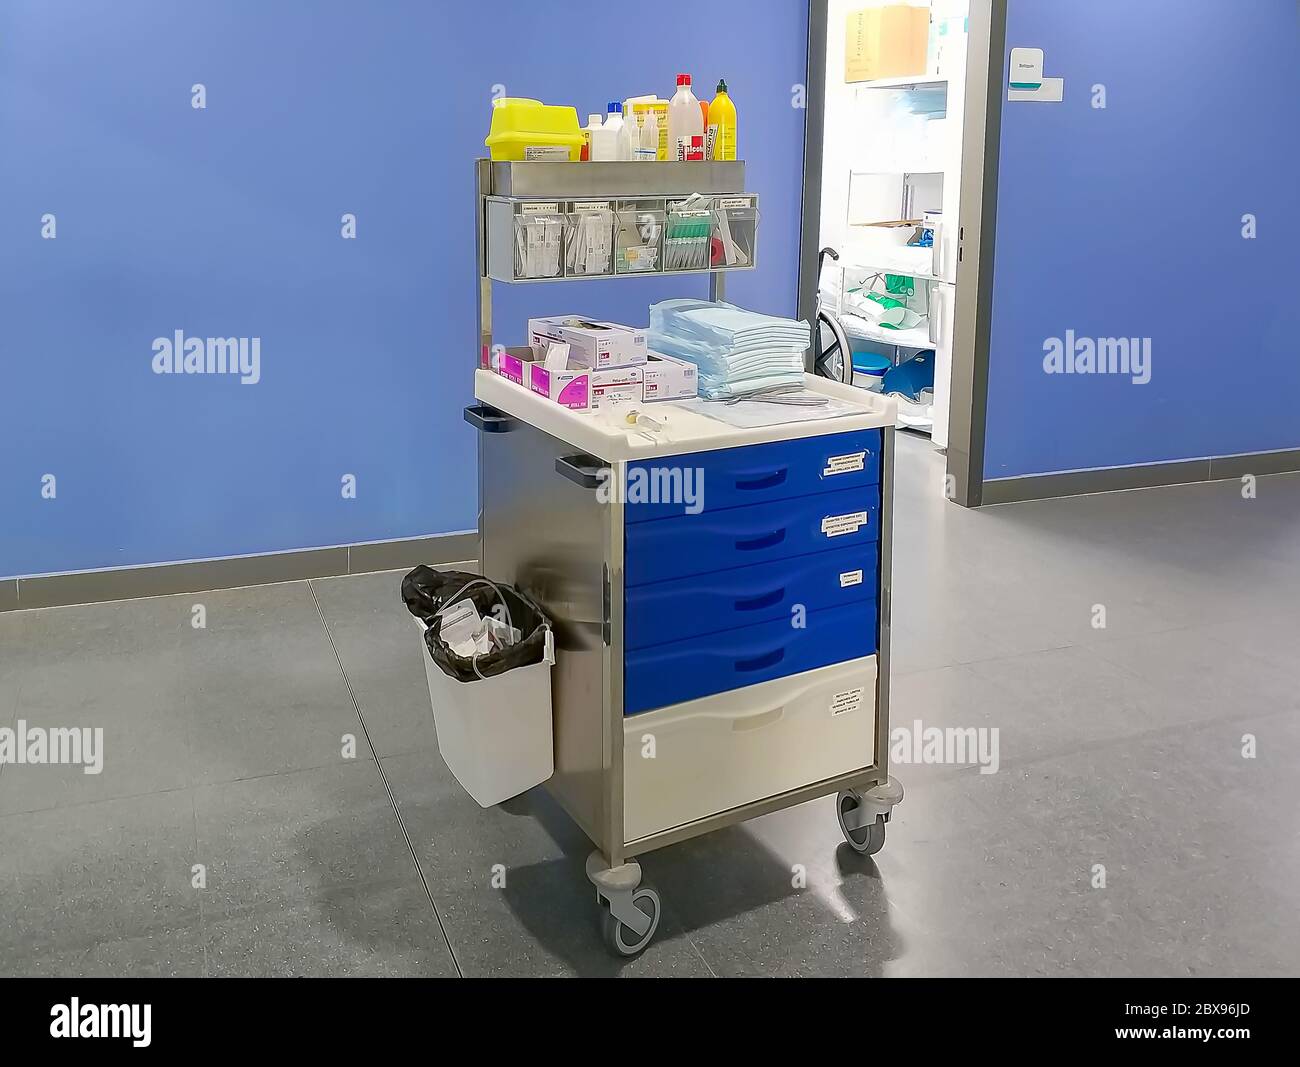 Huelva, Spain - June 6, 2020: Medical supply and medical instrument stuff on a trolley in  in the corridor of a hospital Stock Photo